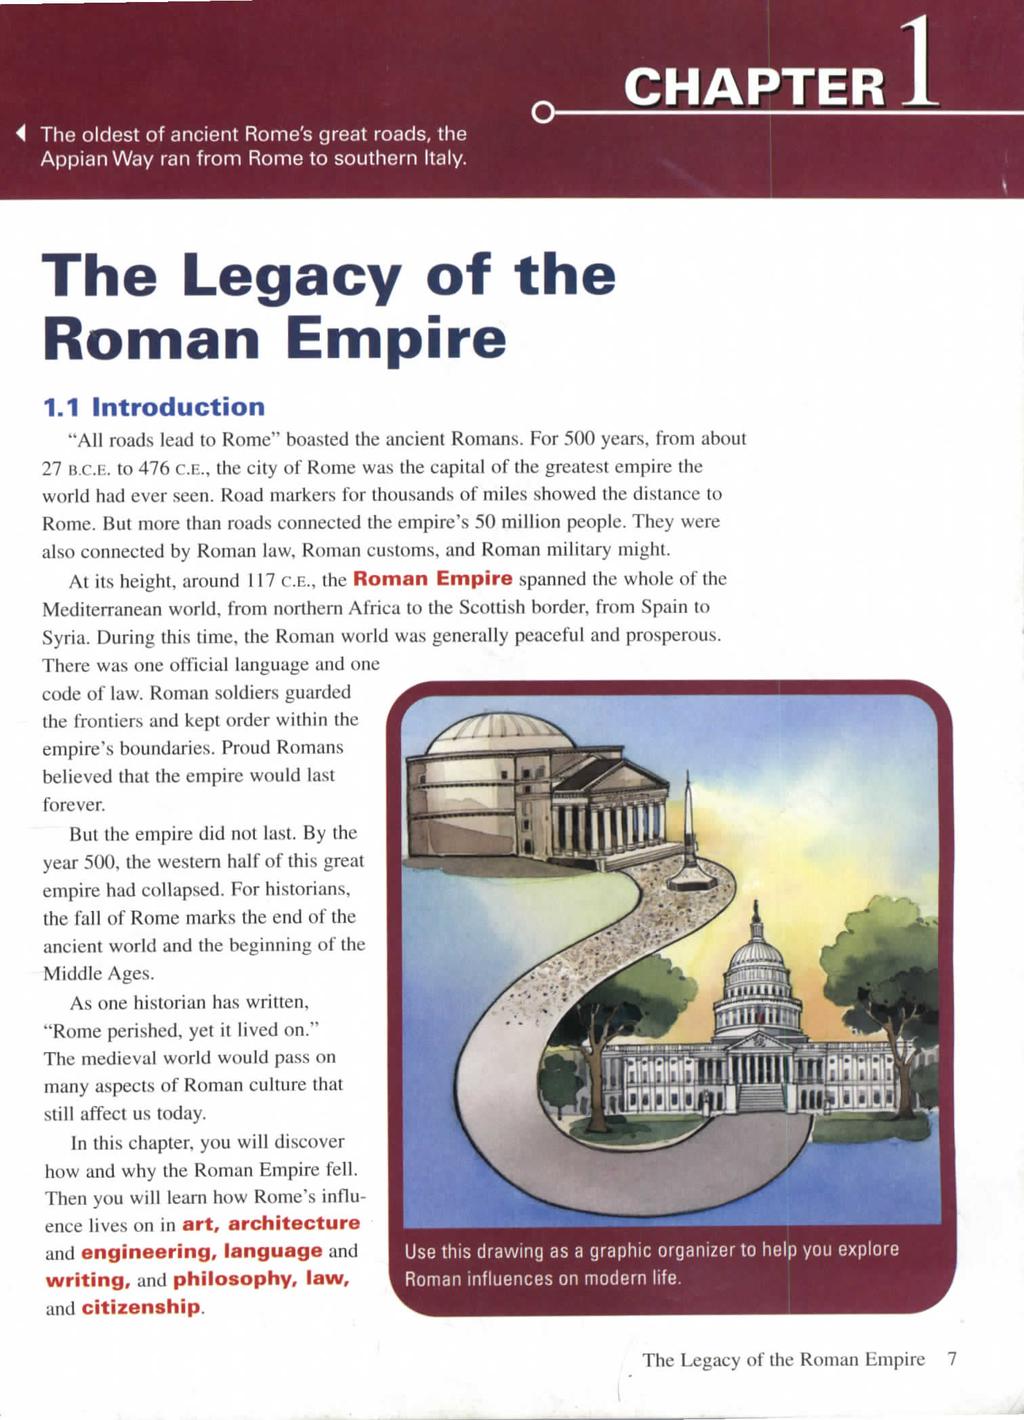 The oldest of ancient Rome's great roads, the Appian Way ran from Rome to southern Italy. CHAPTER The Legacy of the Roman Empire 1.1 Introduction "All roads lead to Rome" boasted the ancient Romans.